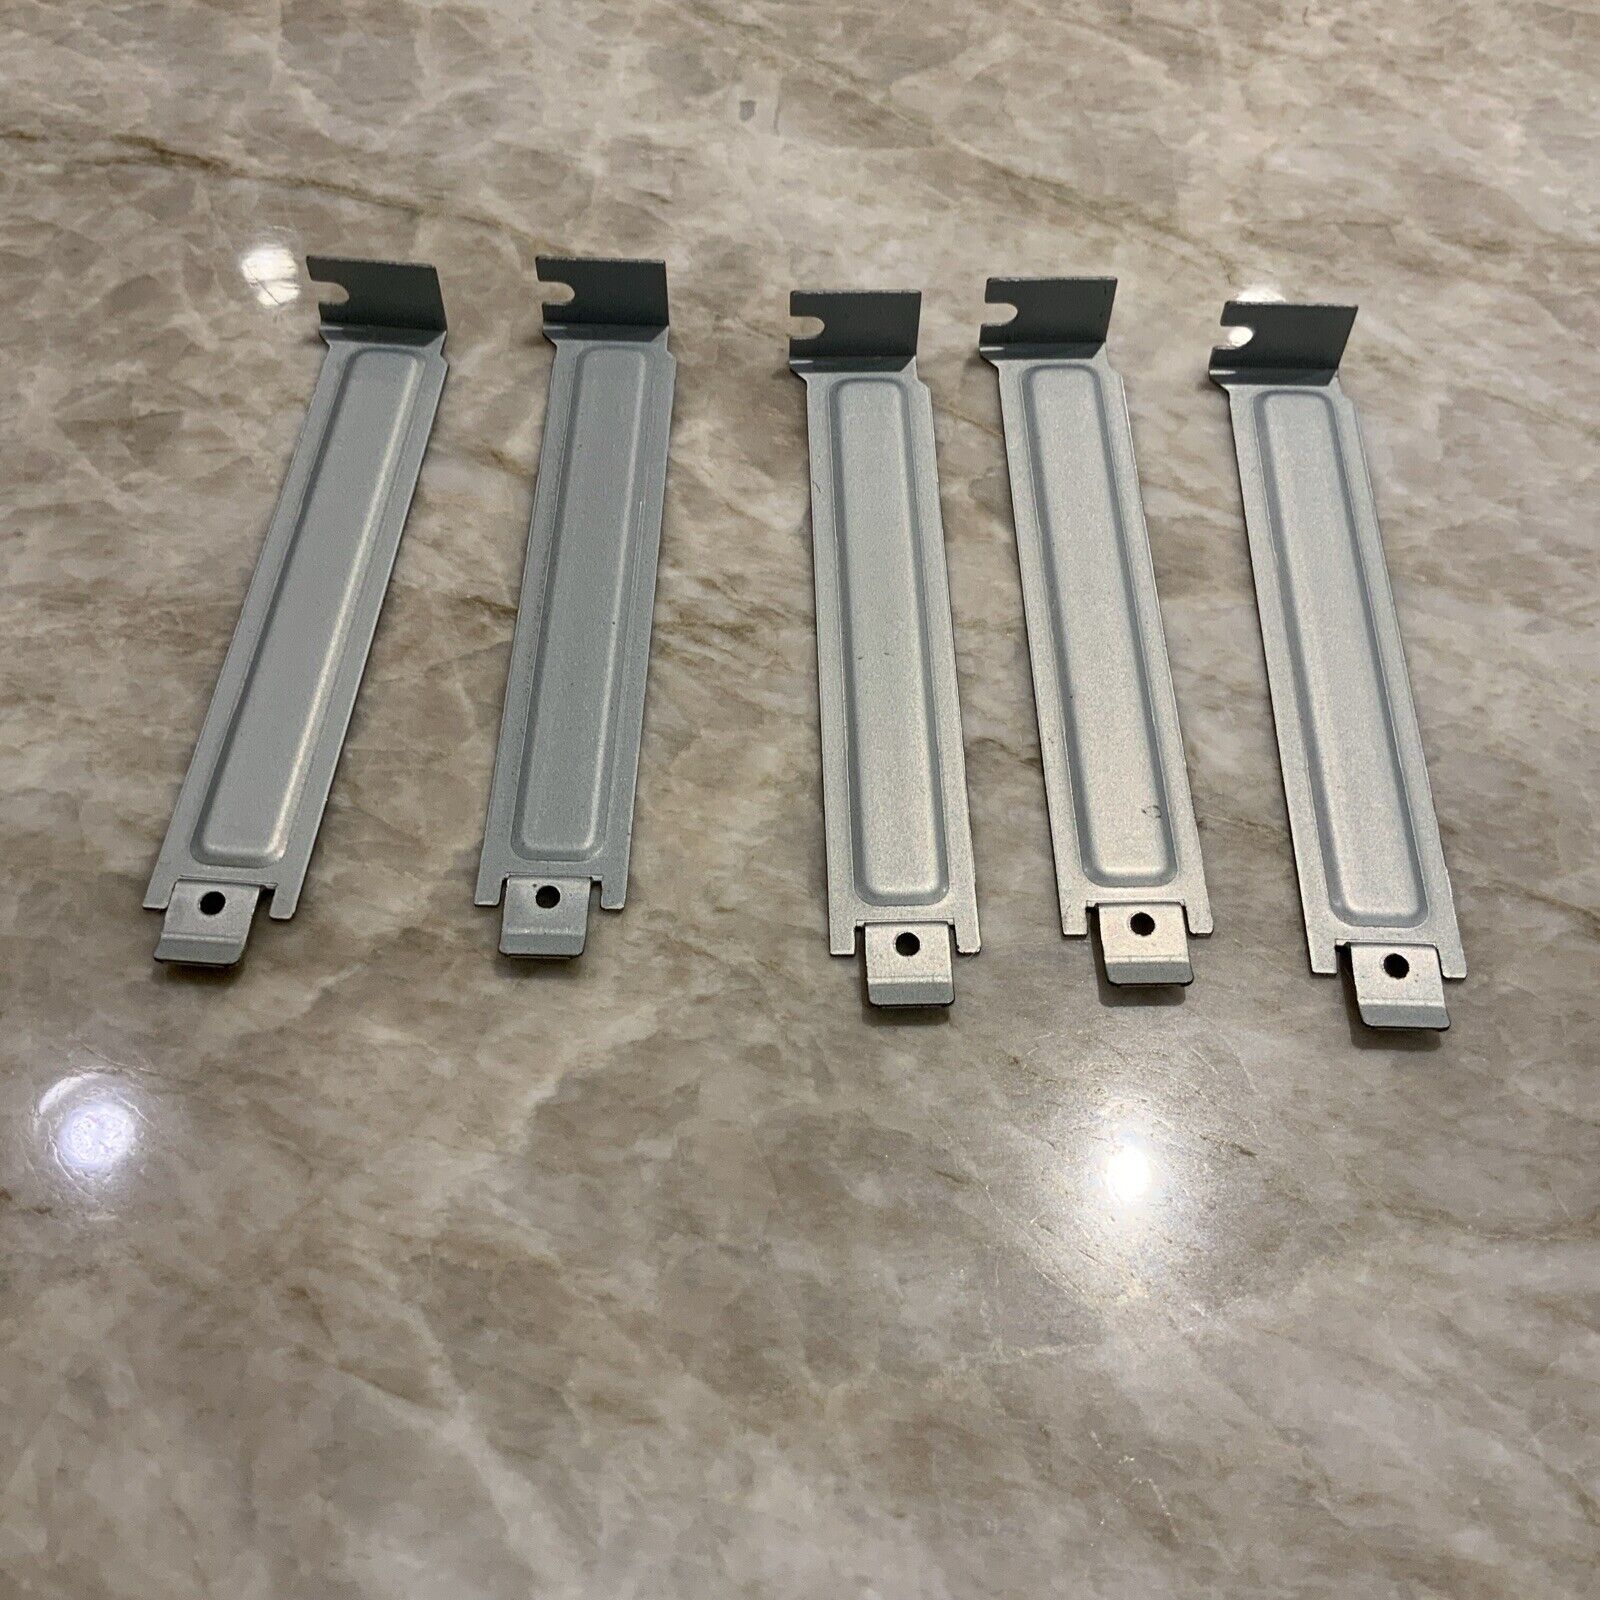 Unique Rare Uncommon Two-screw Tool-free PCI Blank Slot Covers Lot of 5